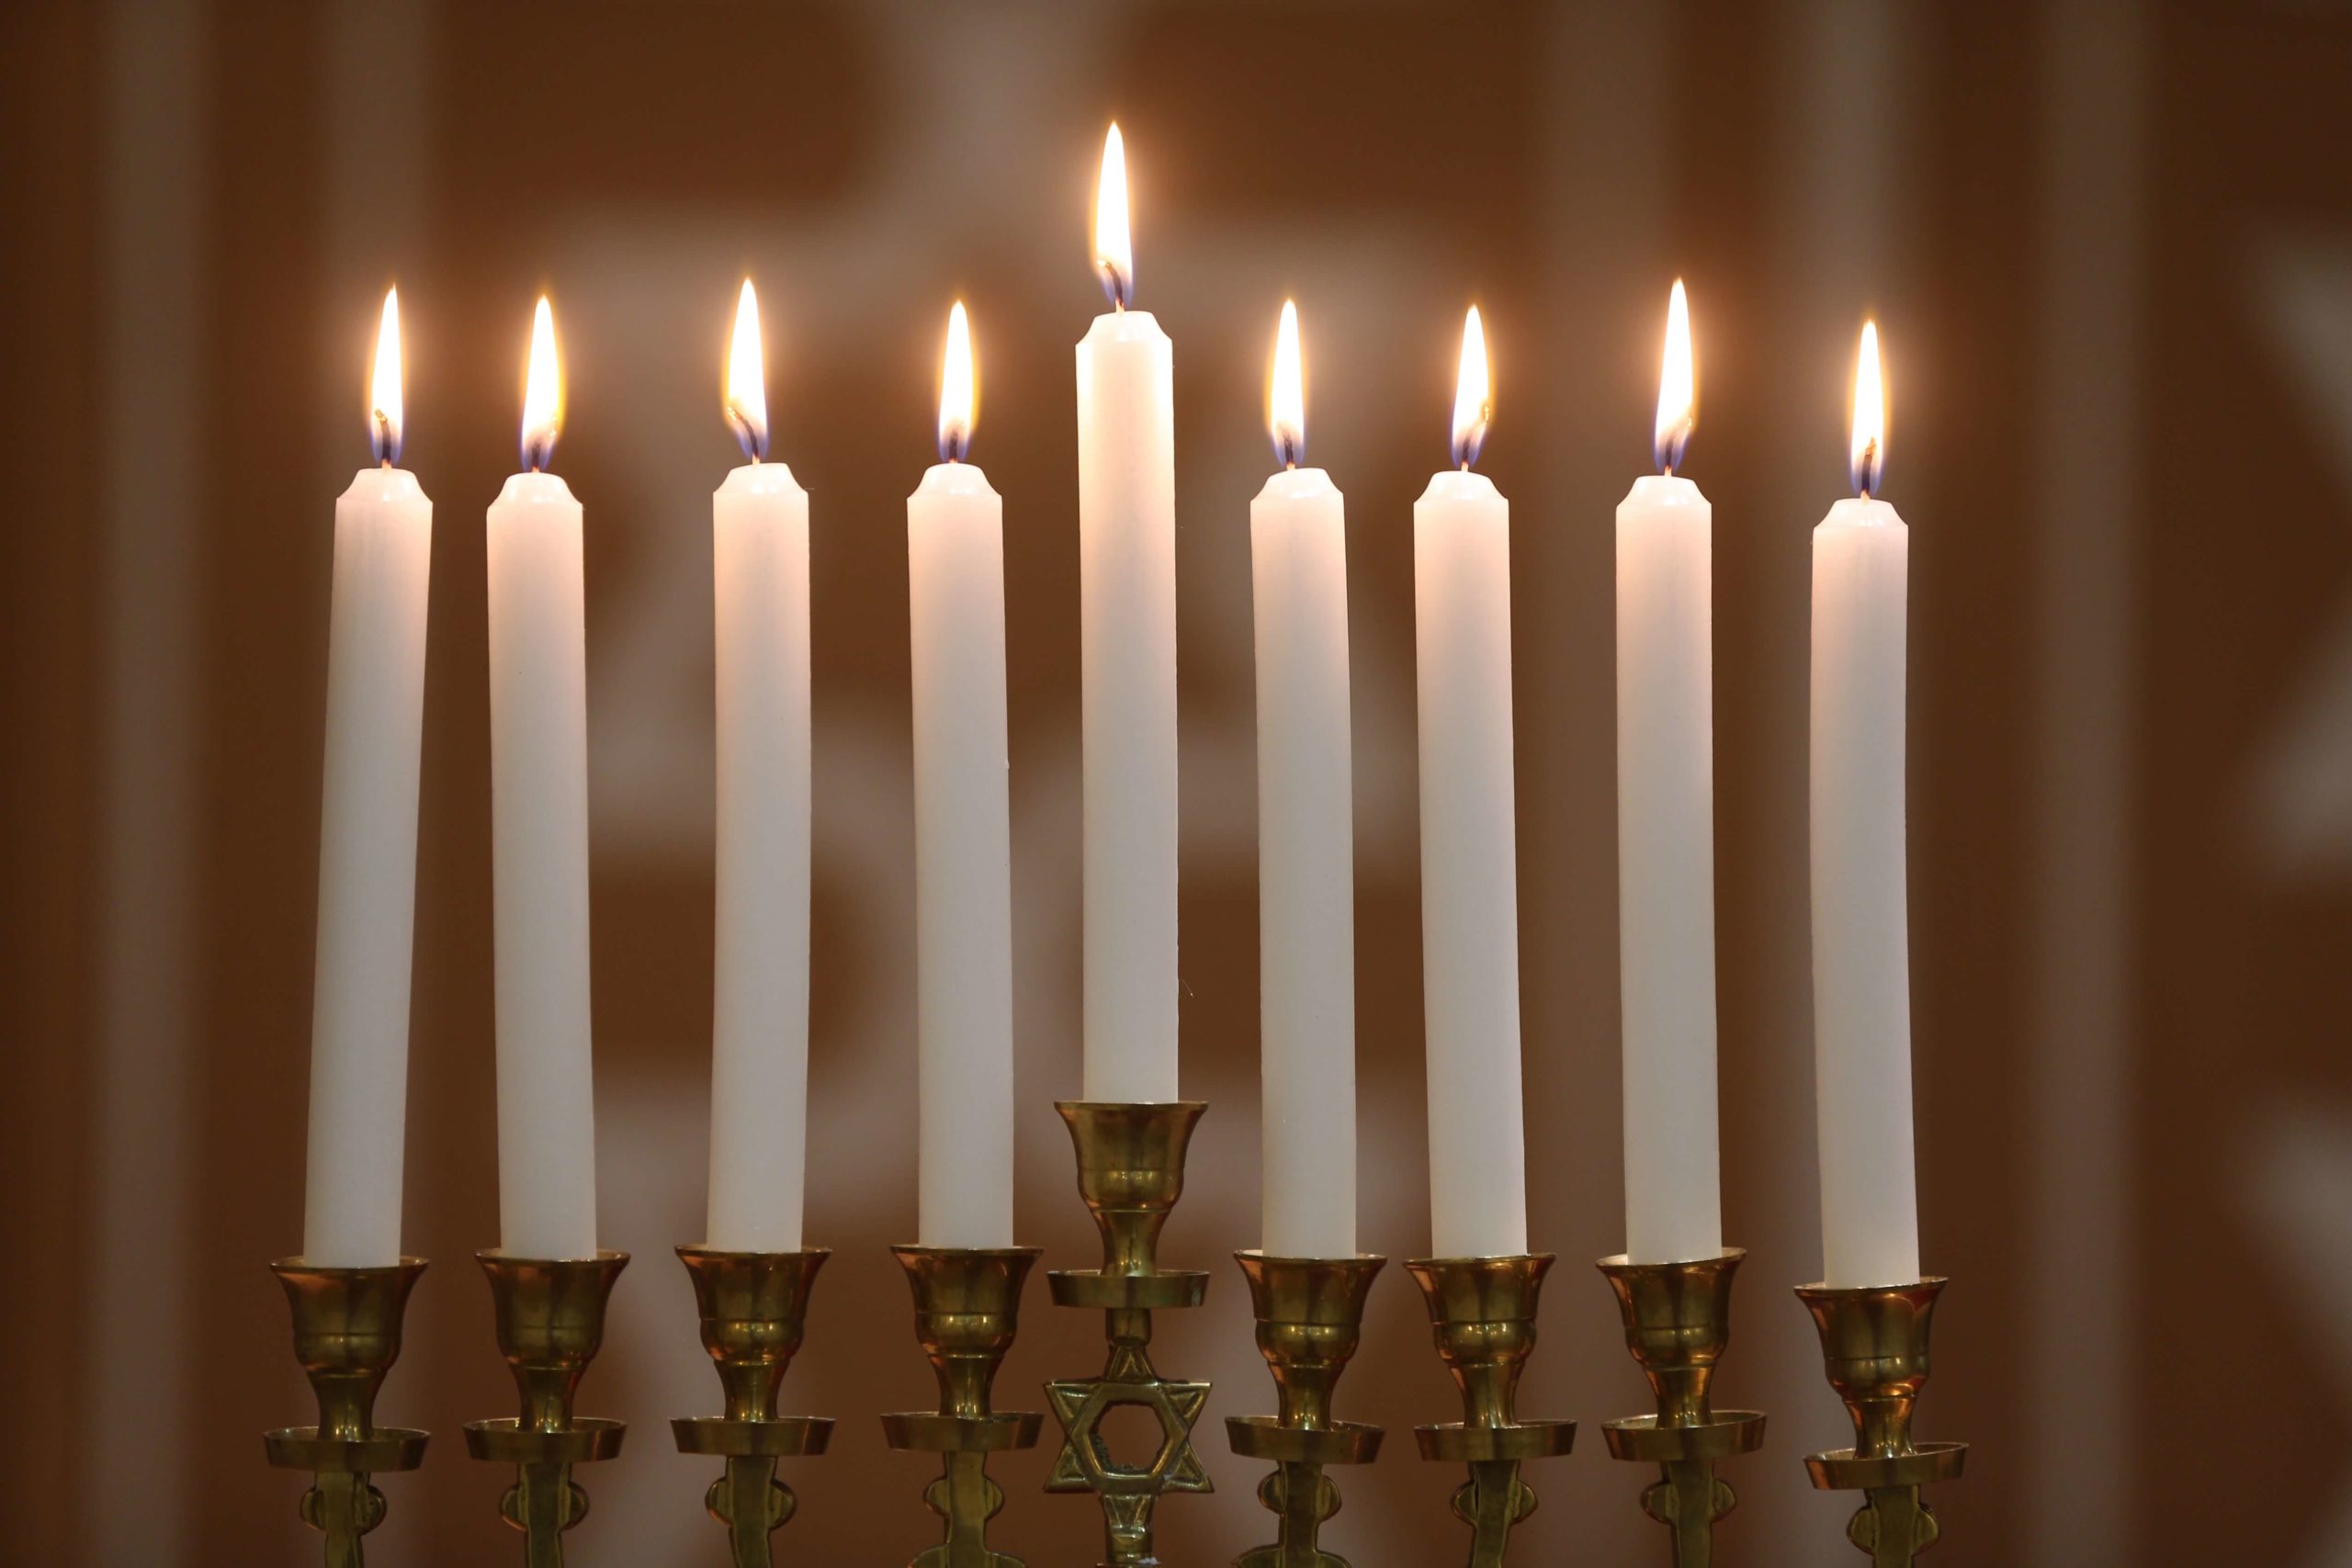 Hanukkha with nine lit candles. (Photo by: Godong/UIG via Getty Images)